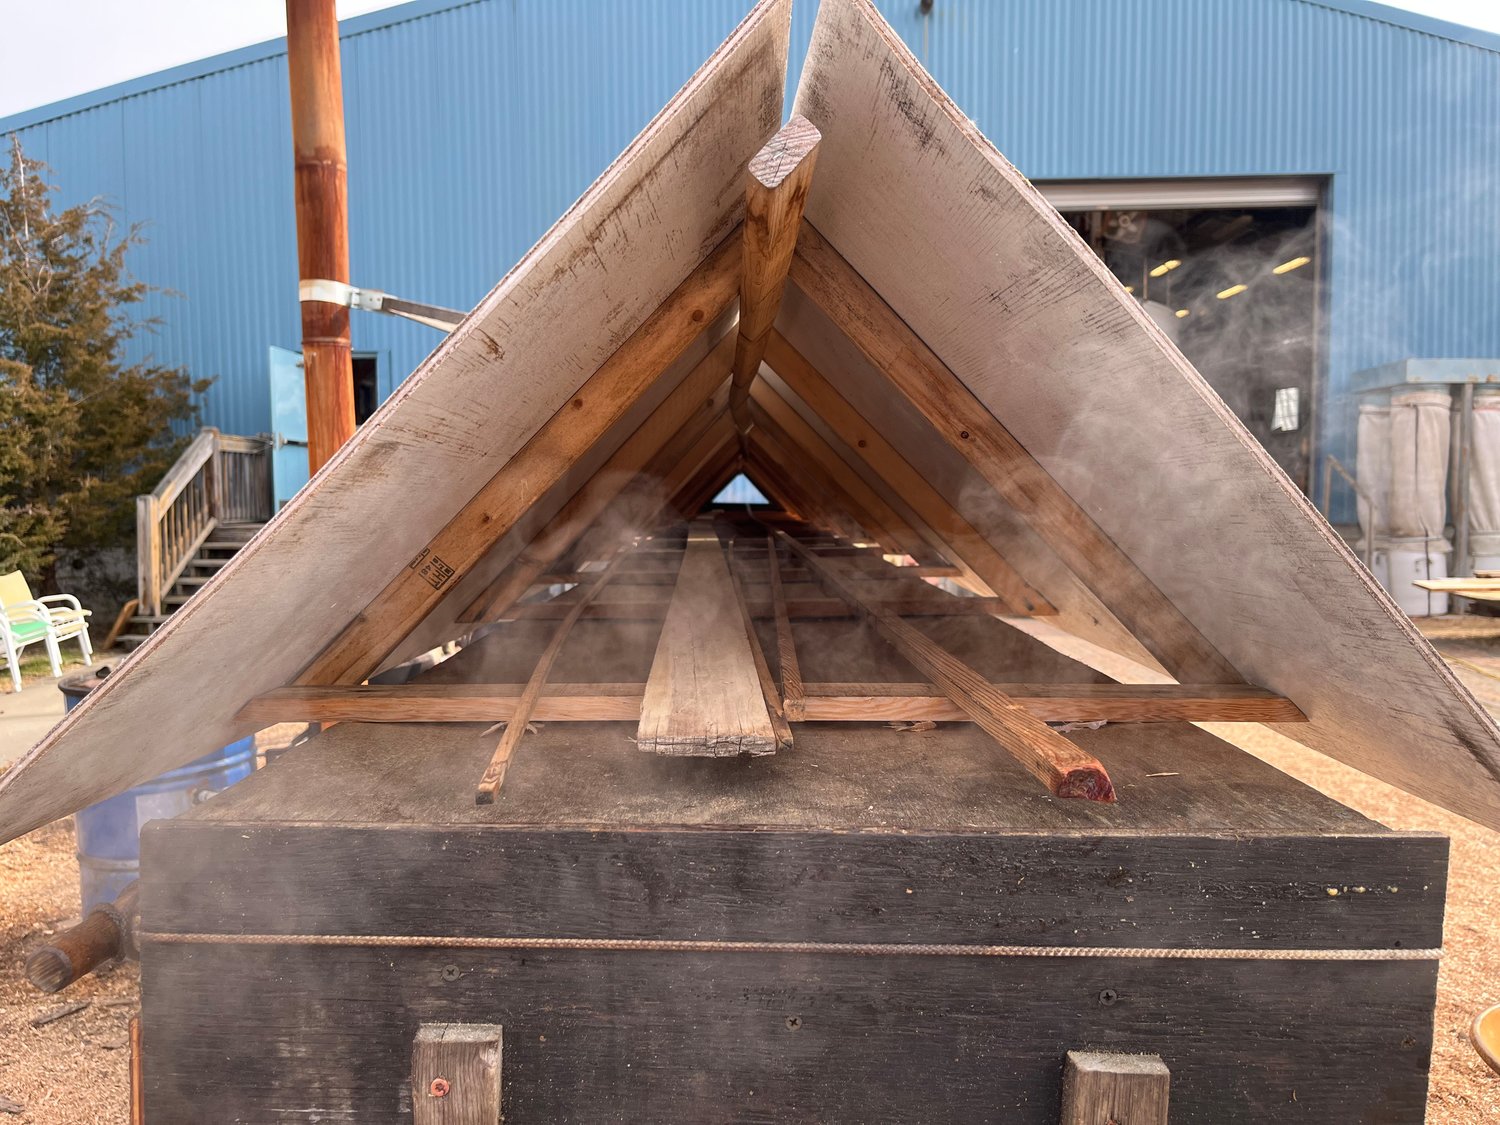 Board planks need to be steamed for some time before they can be fitted to the hull, allowing them to be bent to its shape.